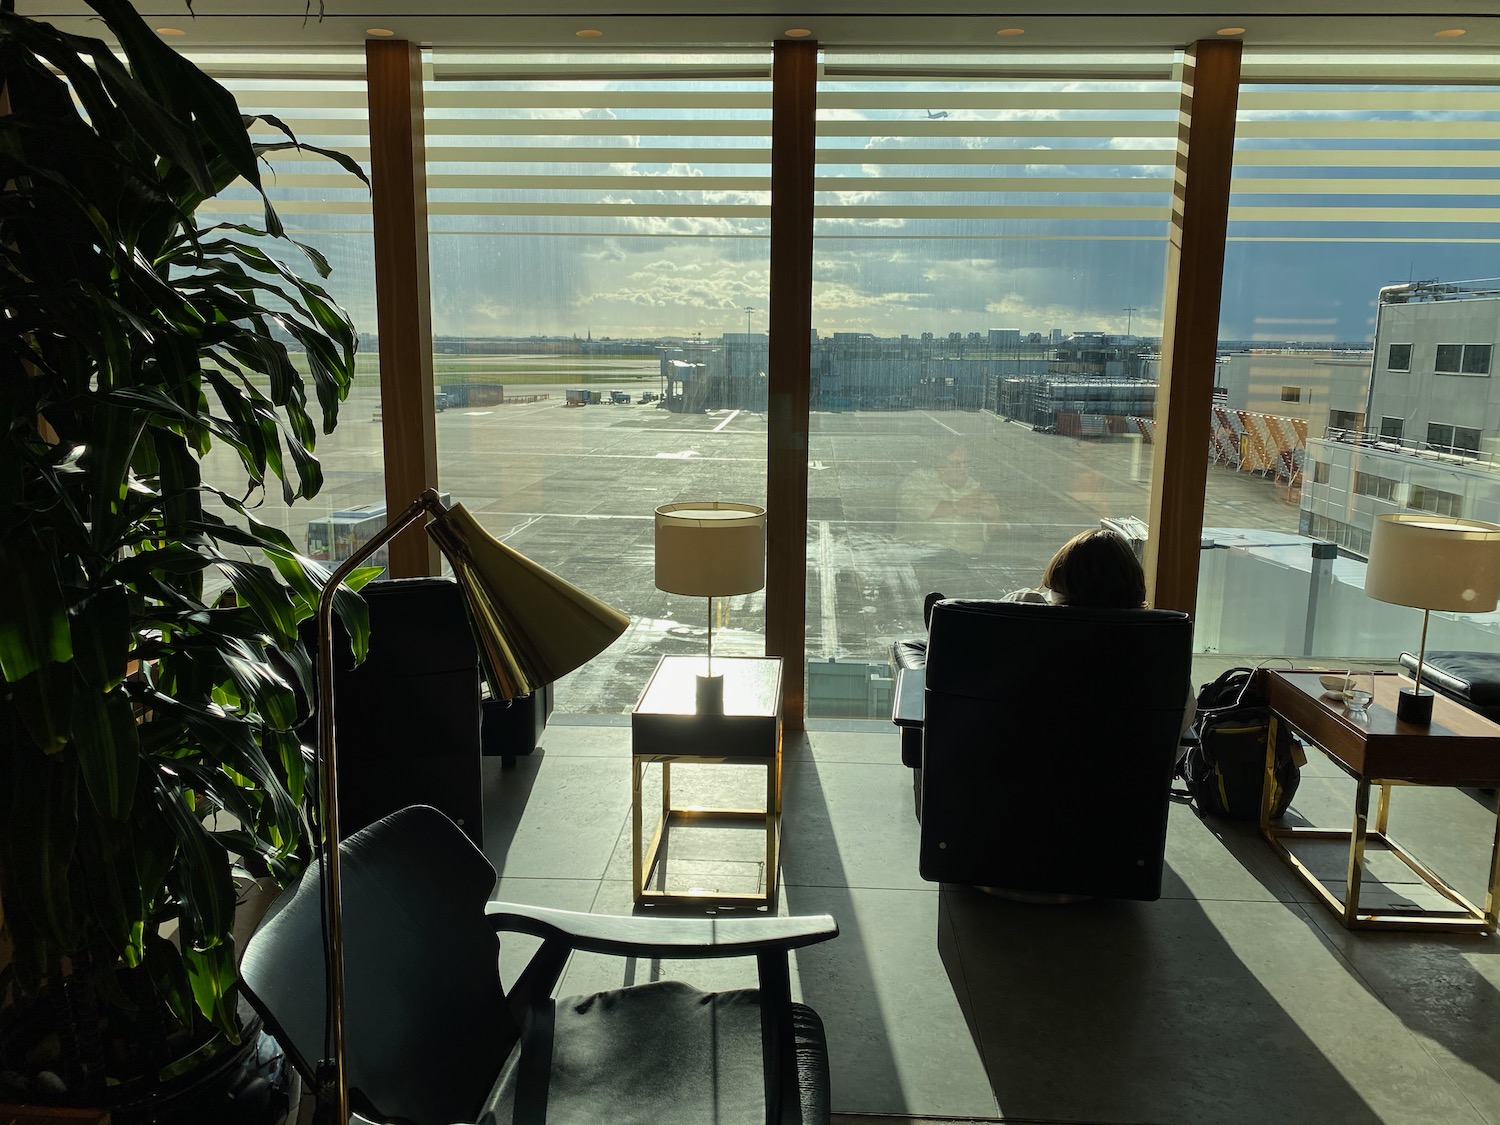 a person sitting in a chair looking out a window at an airport